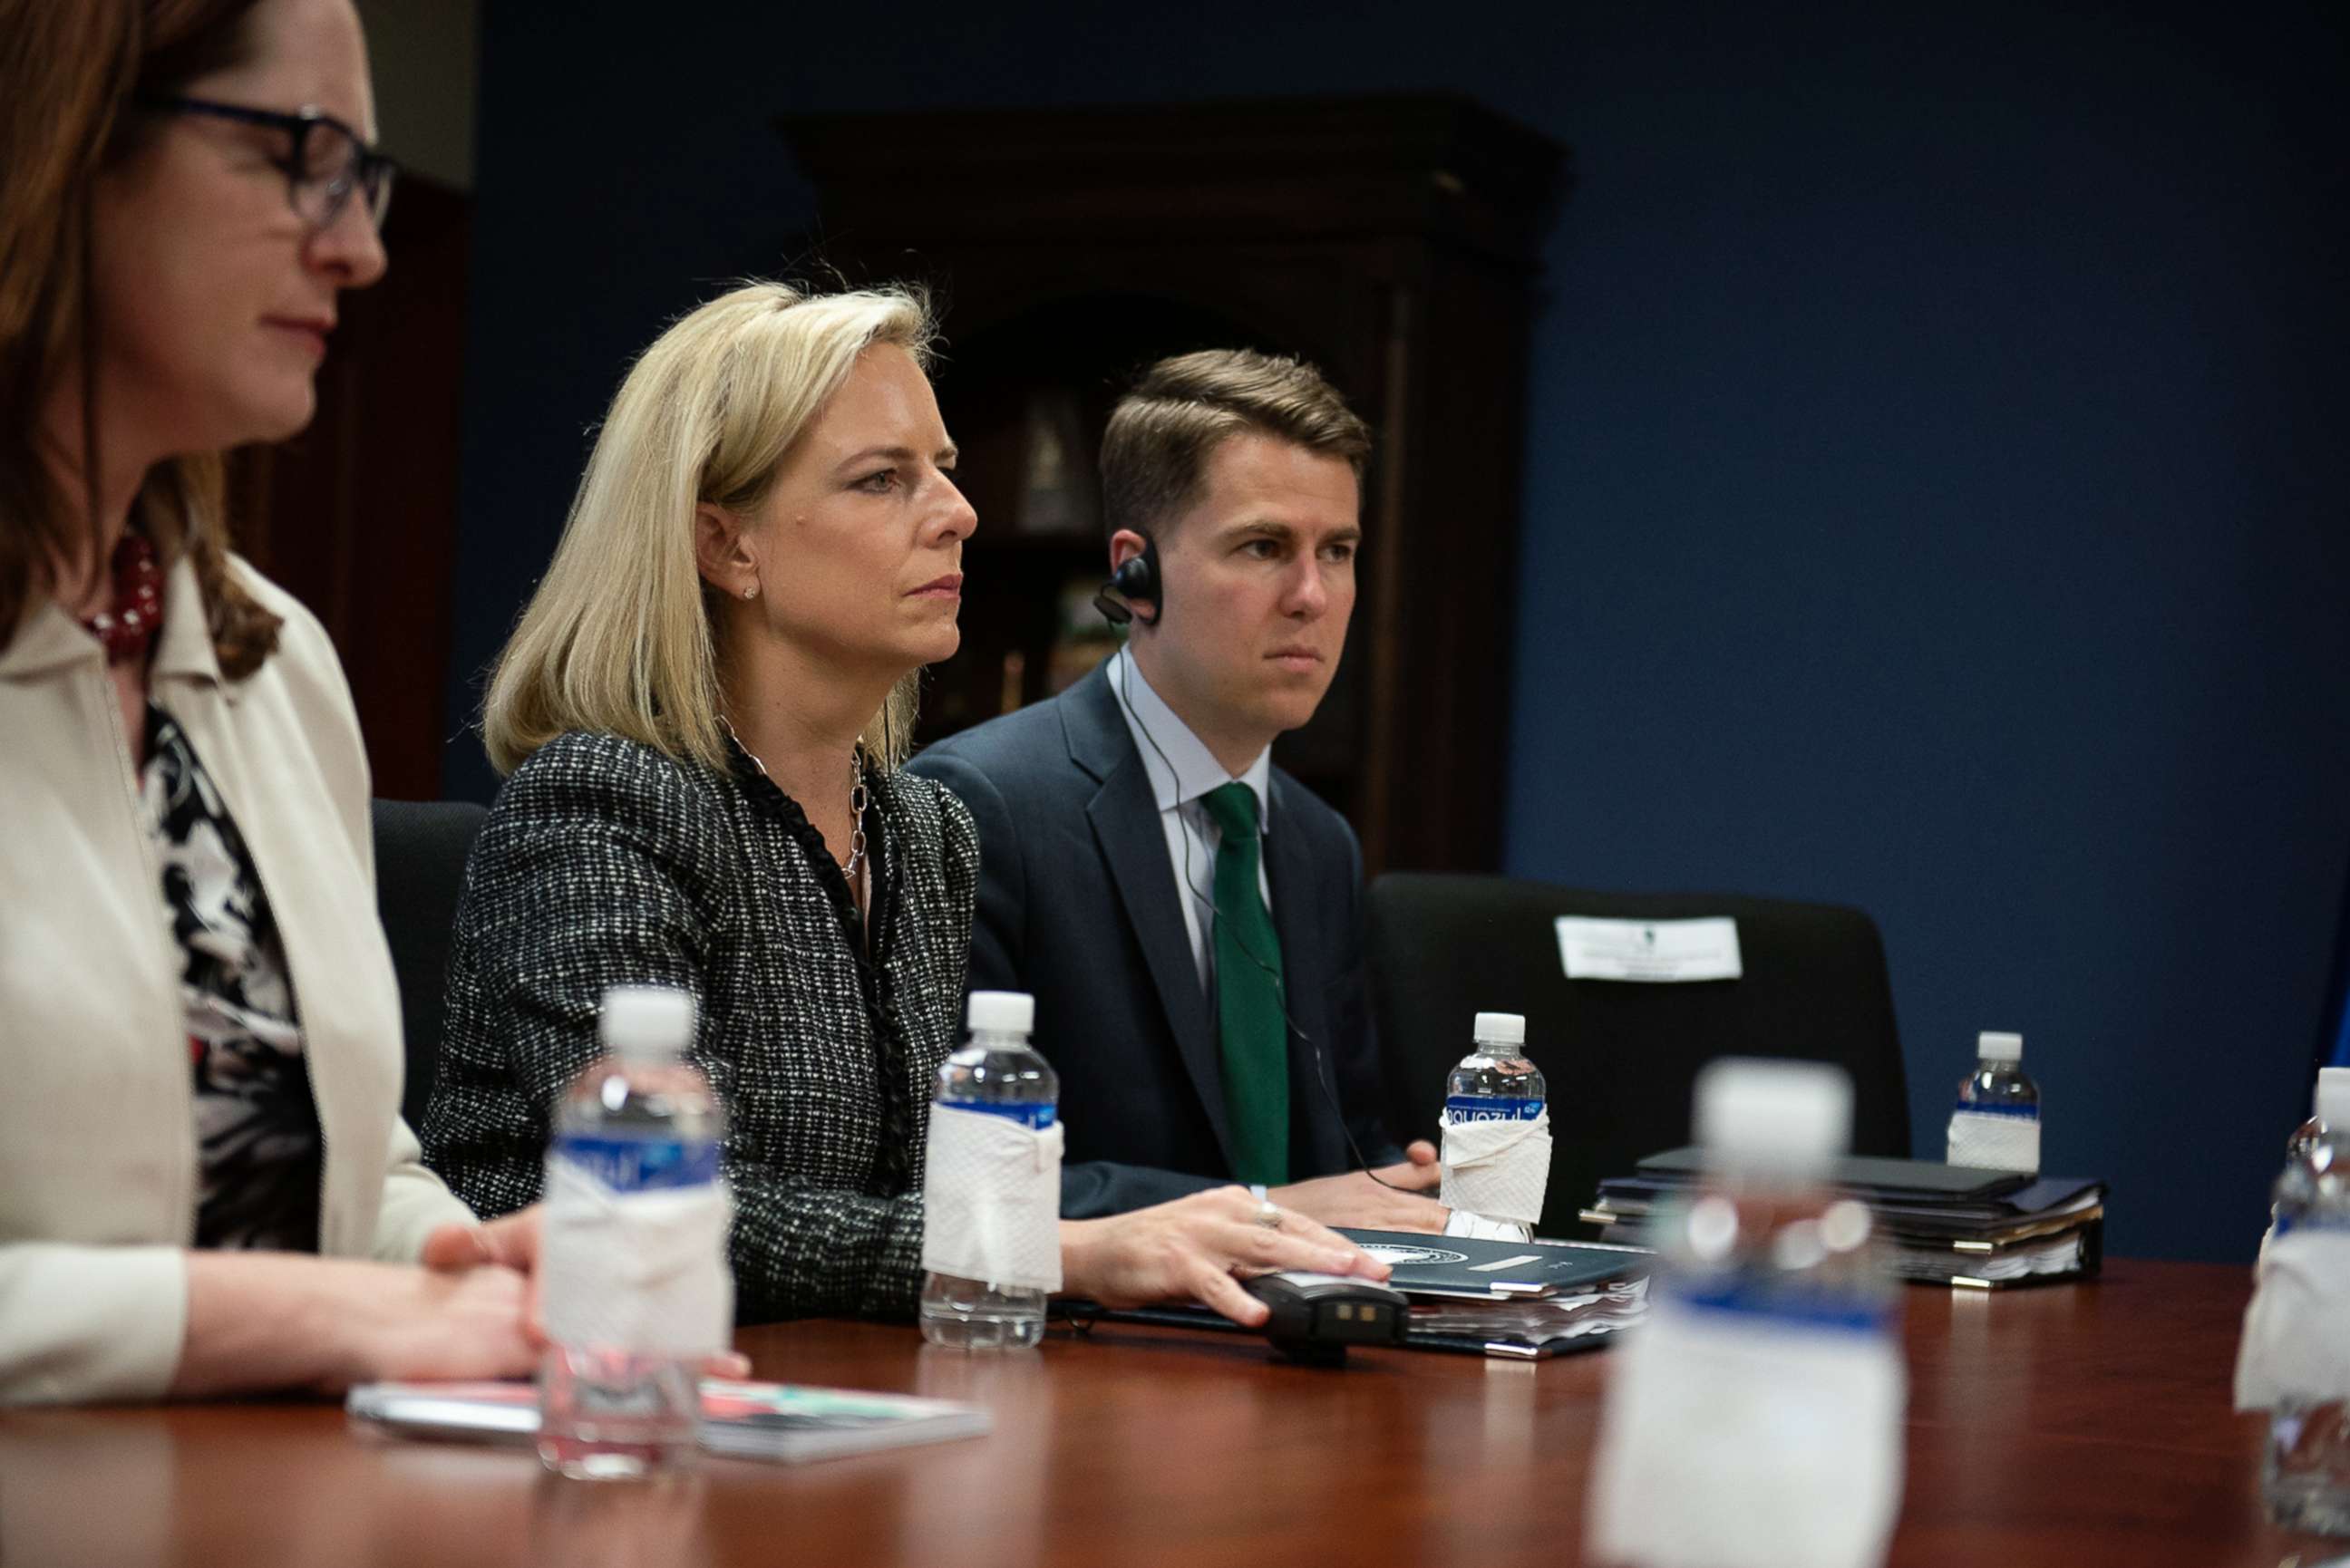 PHOTO: Miles Taylor accompanies Secretary of Homeland Security Kirstjen Nielsen during a trip to Honduras to meet with President Juan Hernandez and security ministers in Tegycugalpa, Honduras, March 27, 2018.